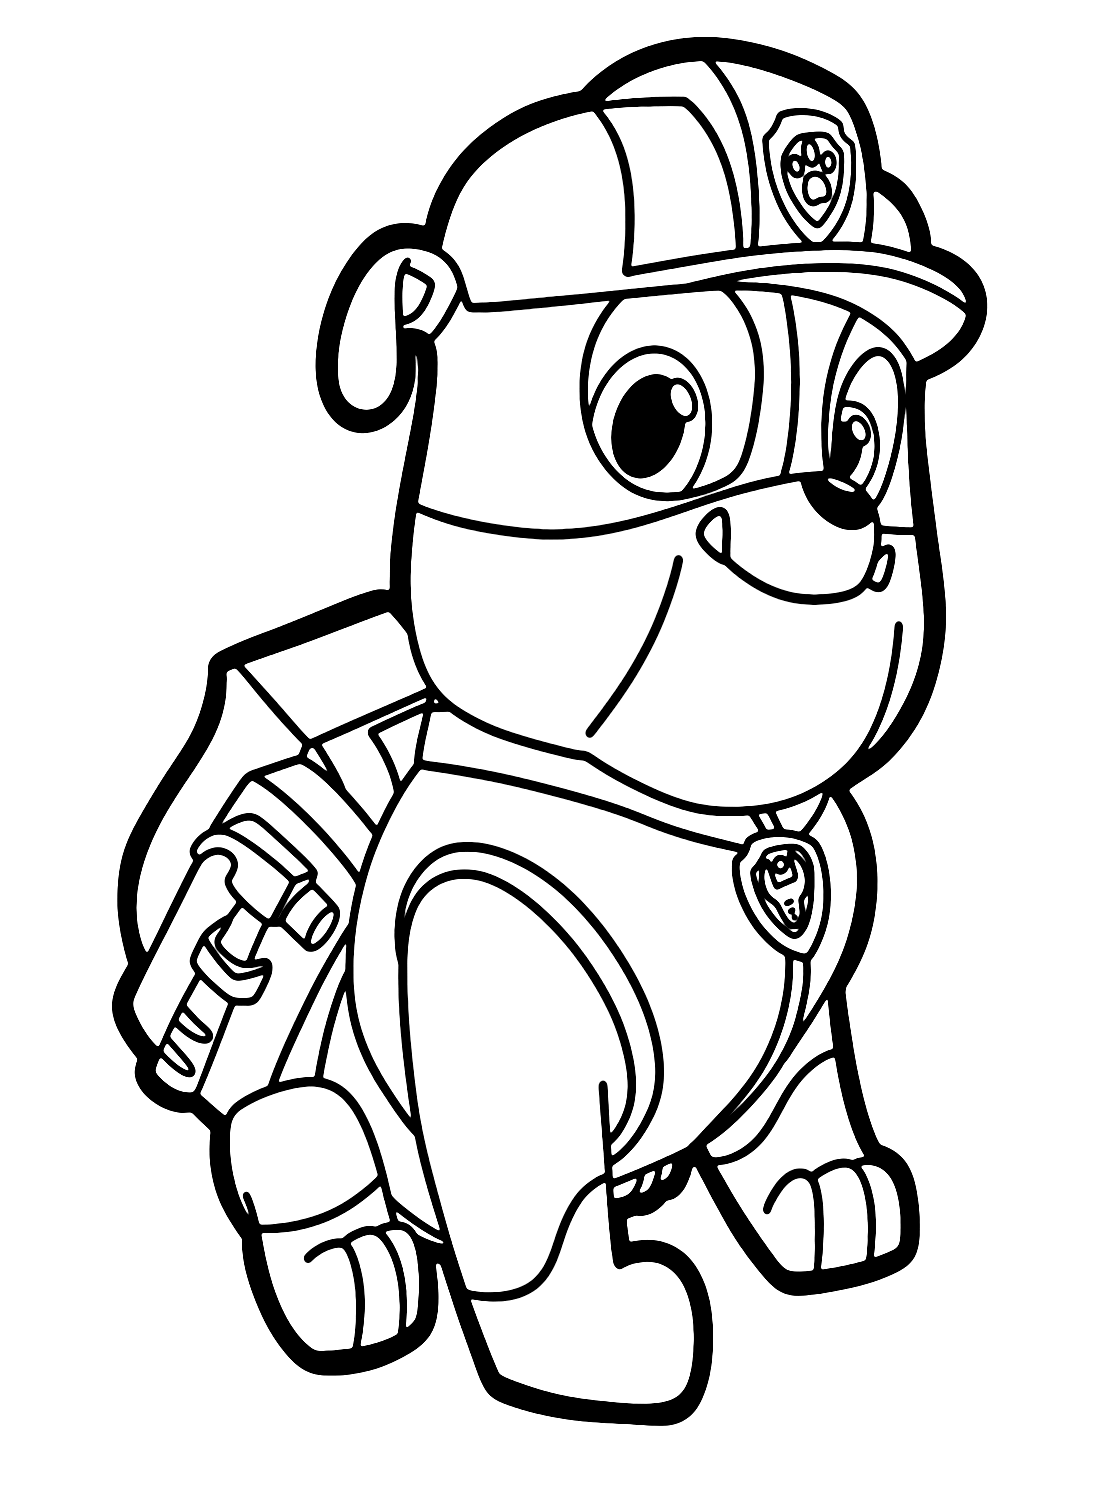 Images Rubble Paw Patrol from Rubble Paw Patrol